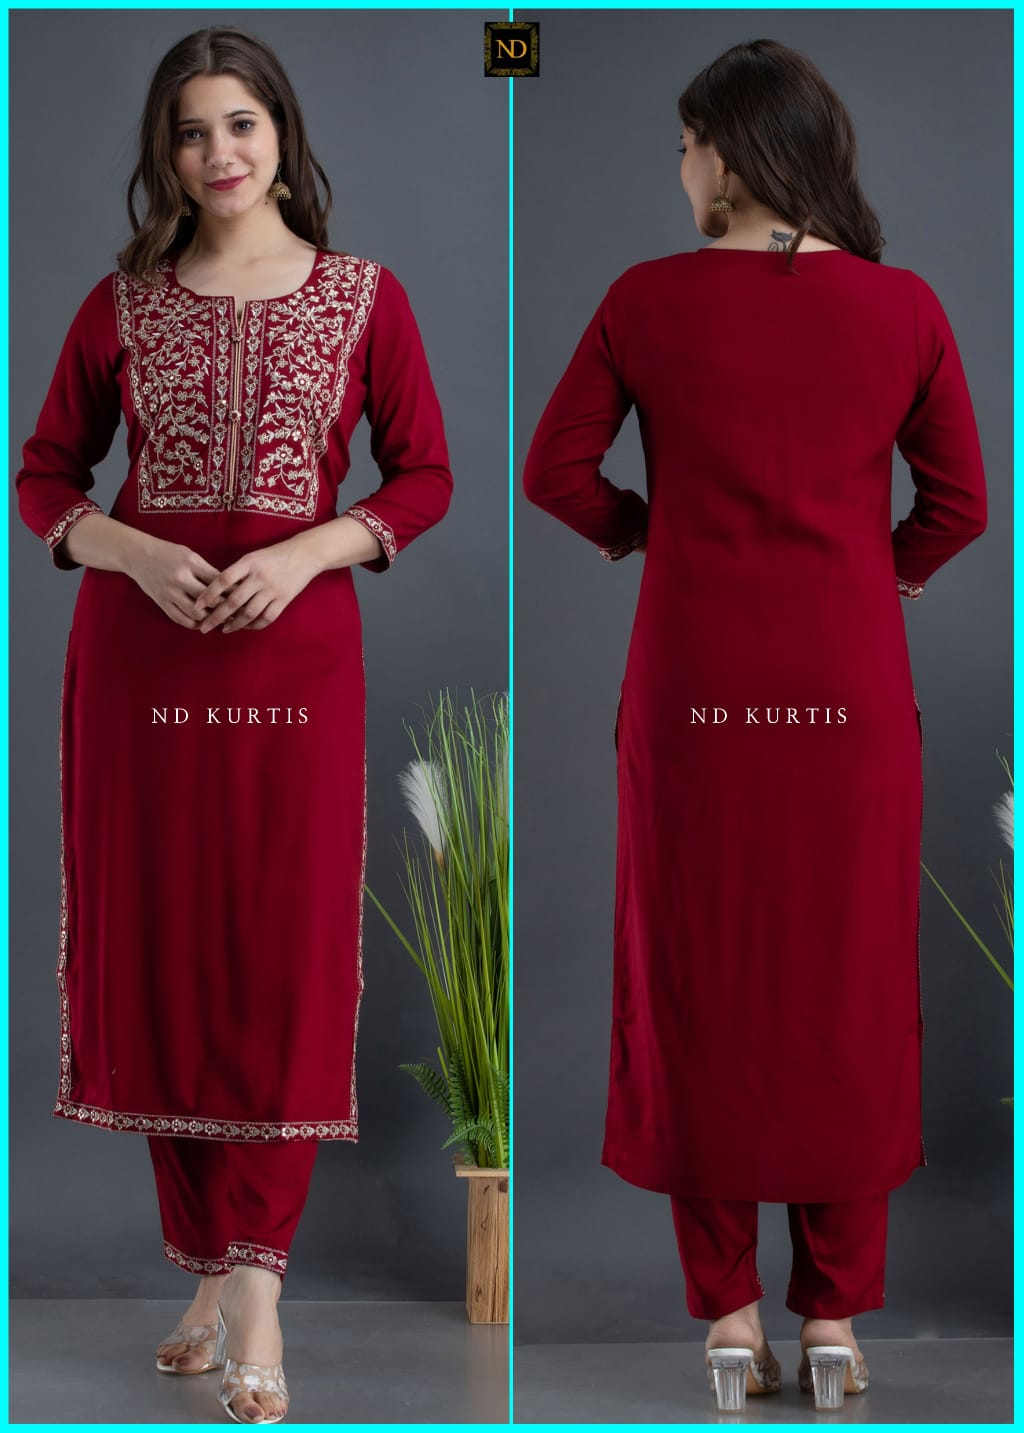 VIHAAN IMPEX - VIHAAN IMPEX kurtis the new age indian woman. VIHAAN IMPEX  has redefined the traditional indian outfit to something that a woman can  wear and look simple yet stylish. the